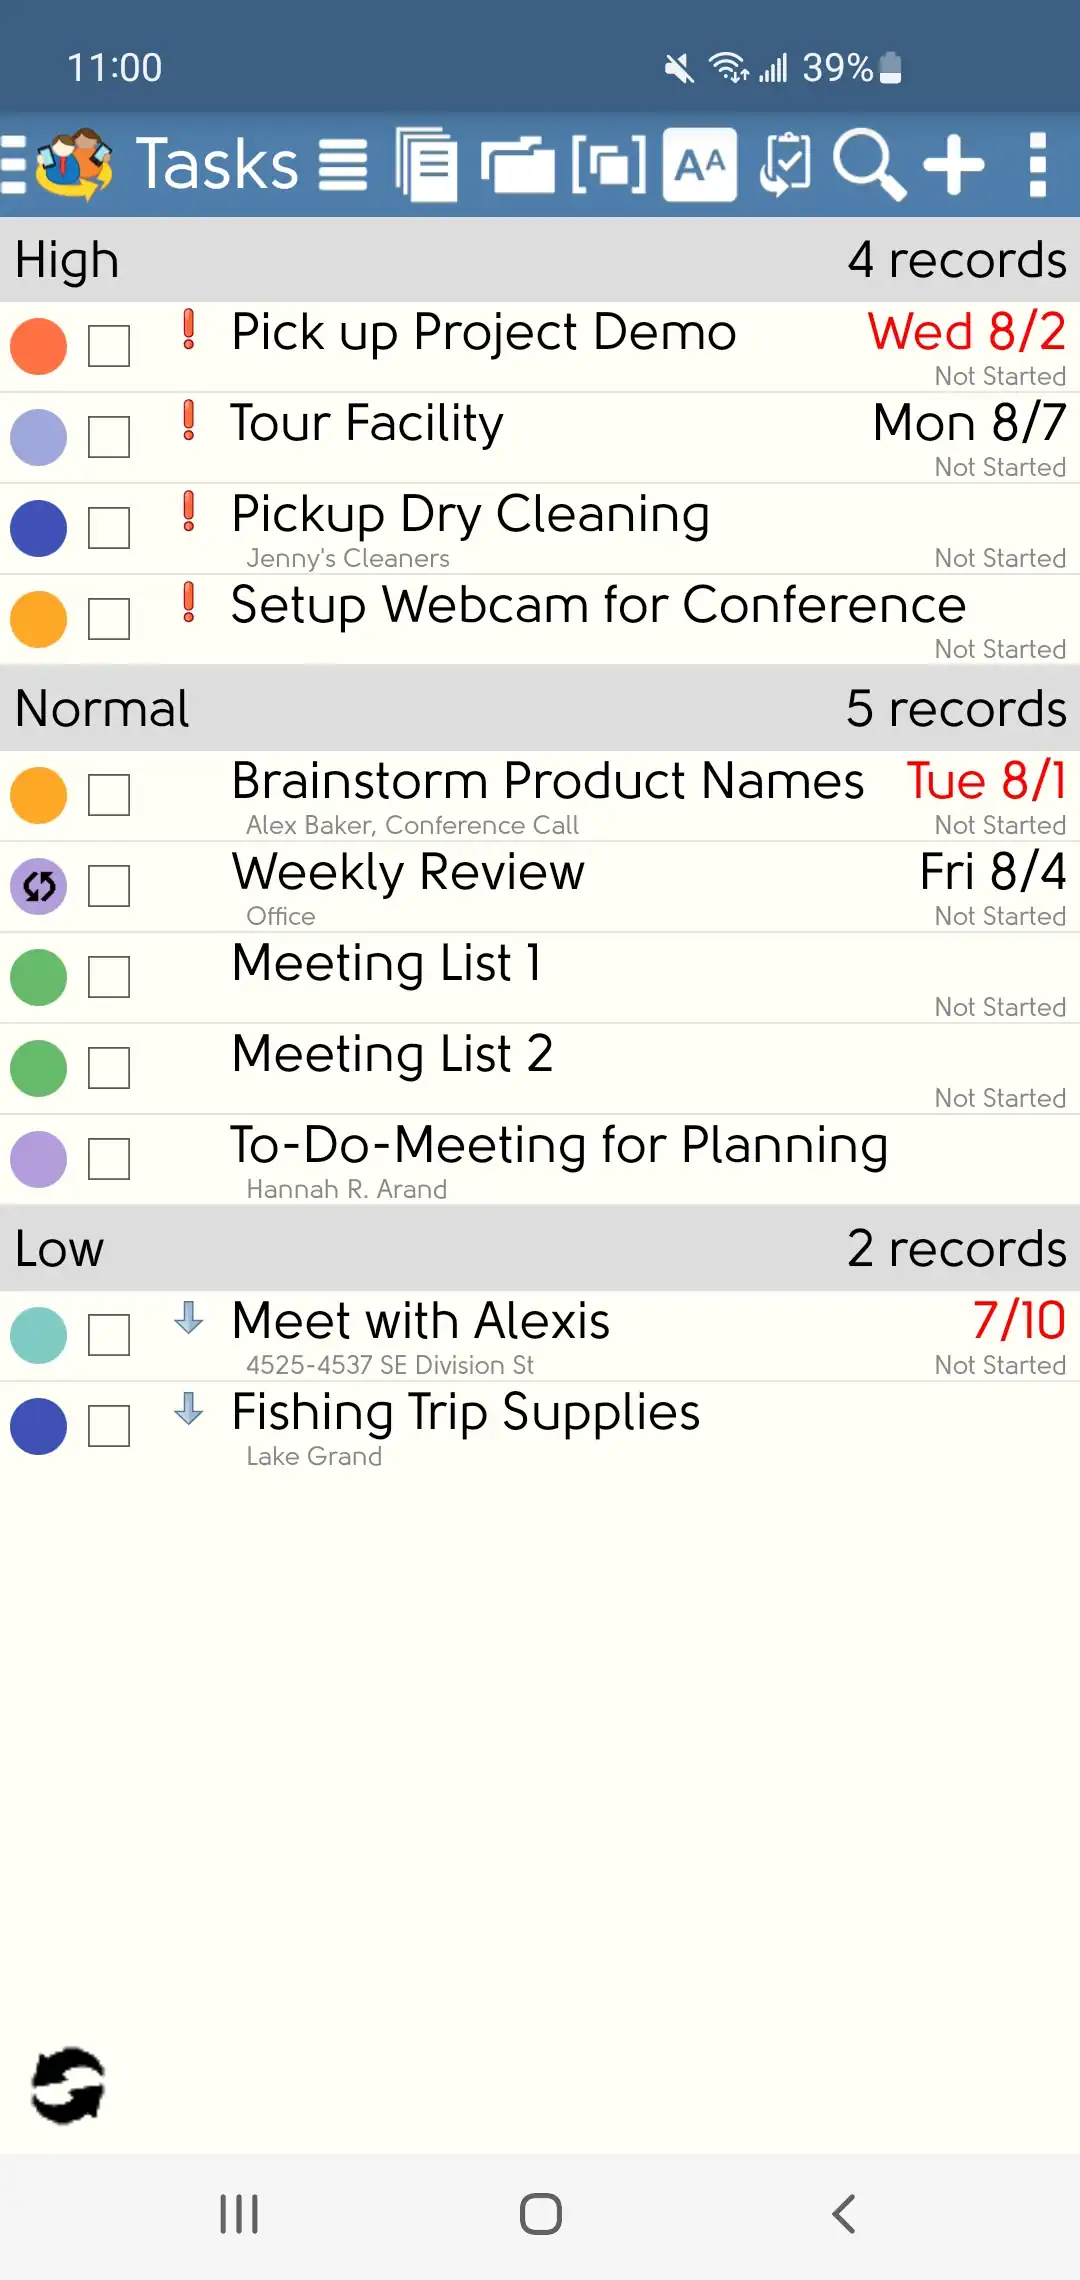 DejaOffice Task List with Group by Priority